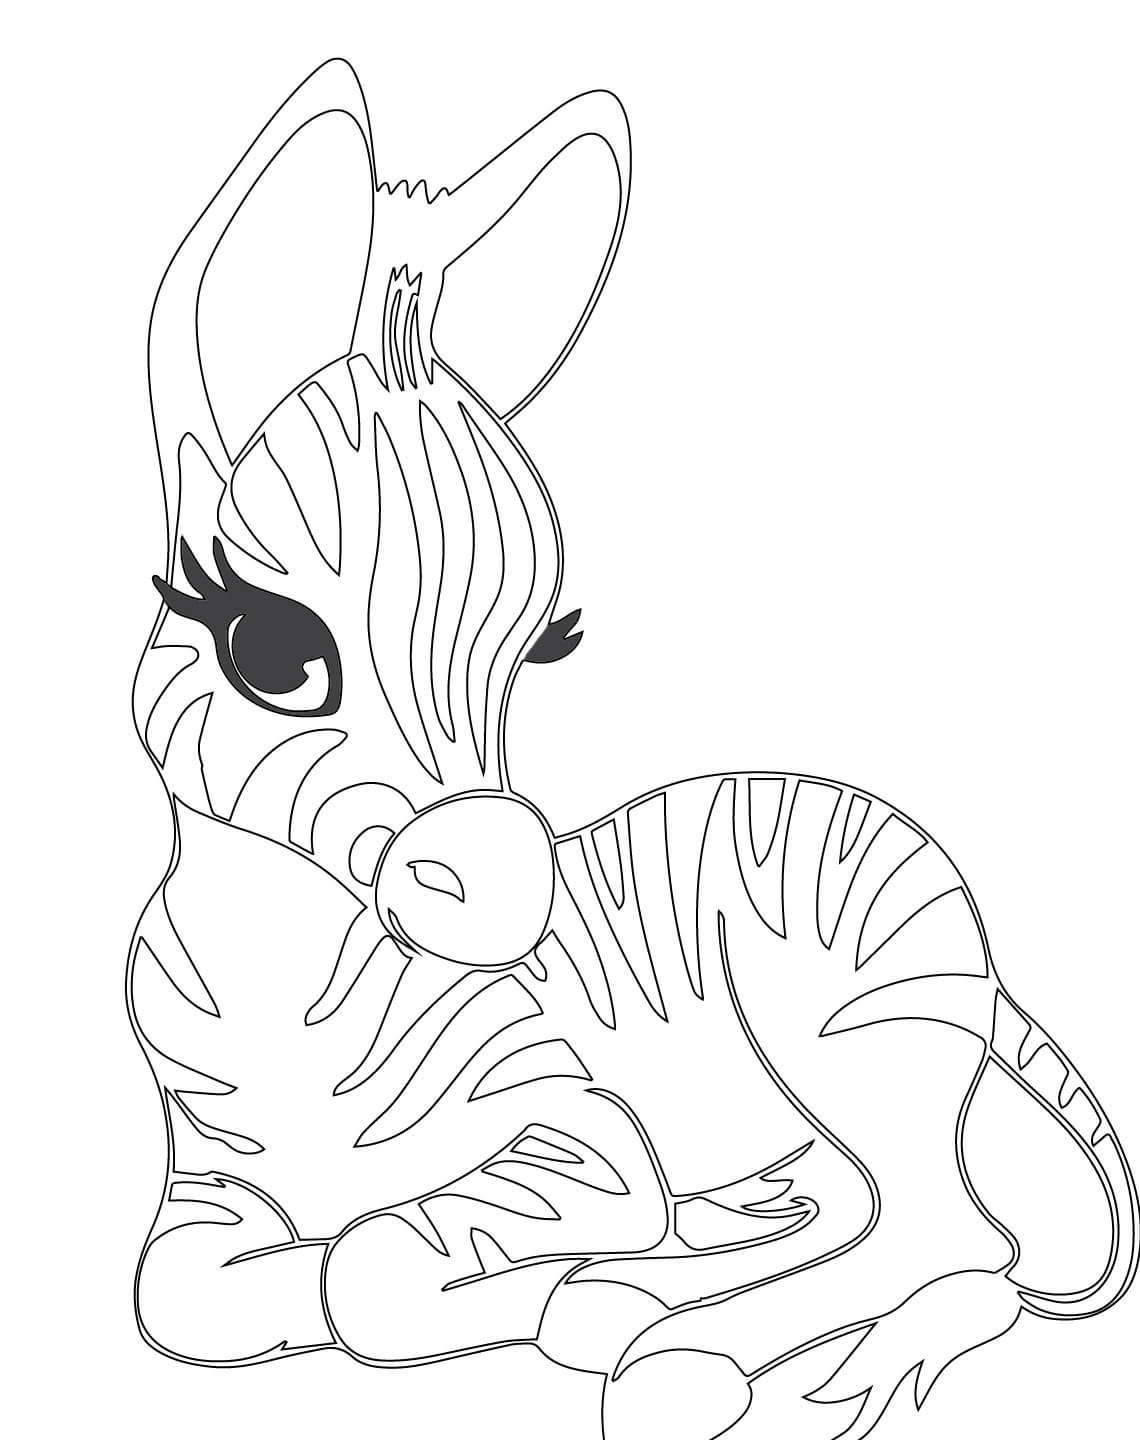 Cute Baby Zebra Coloring Pages at GetColorings.com | Free ...